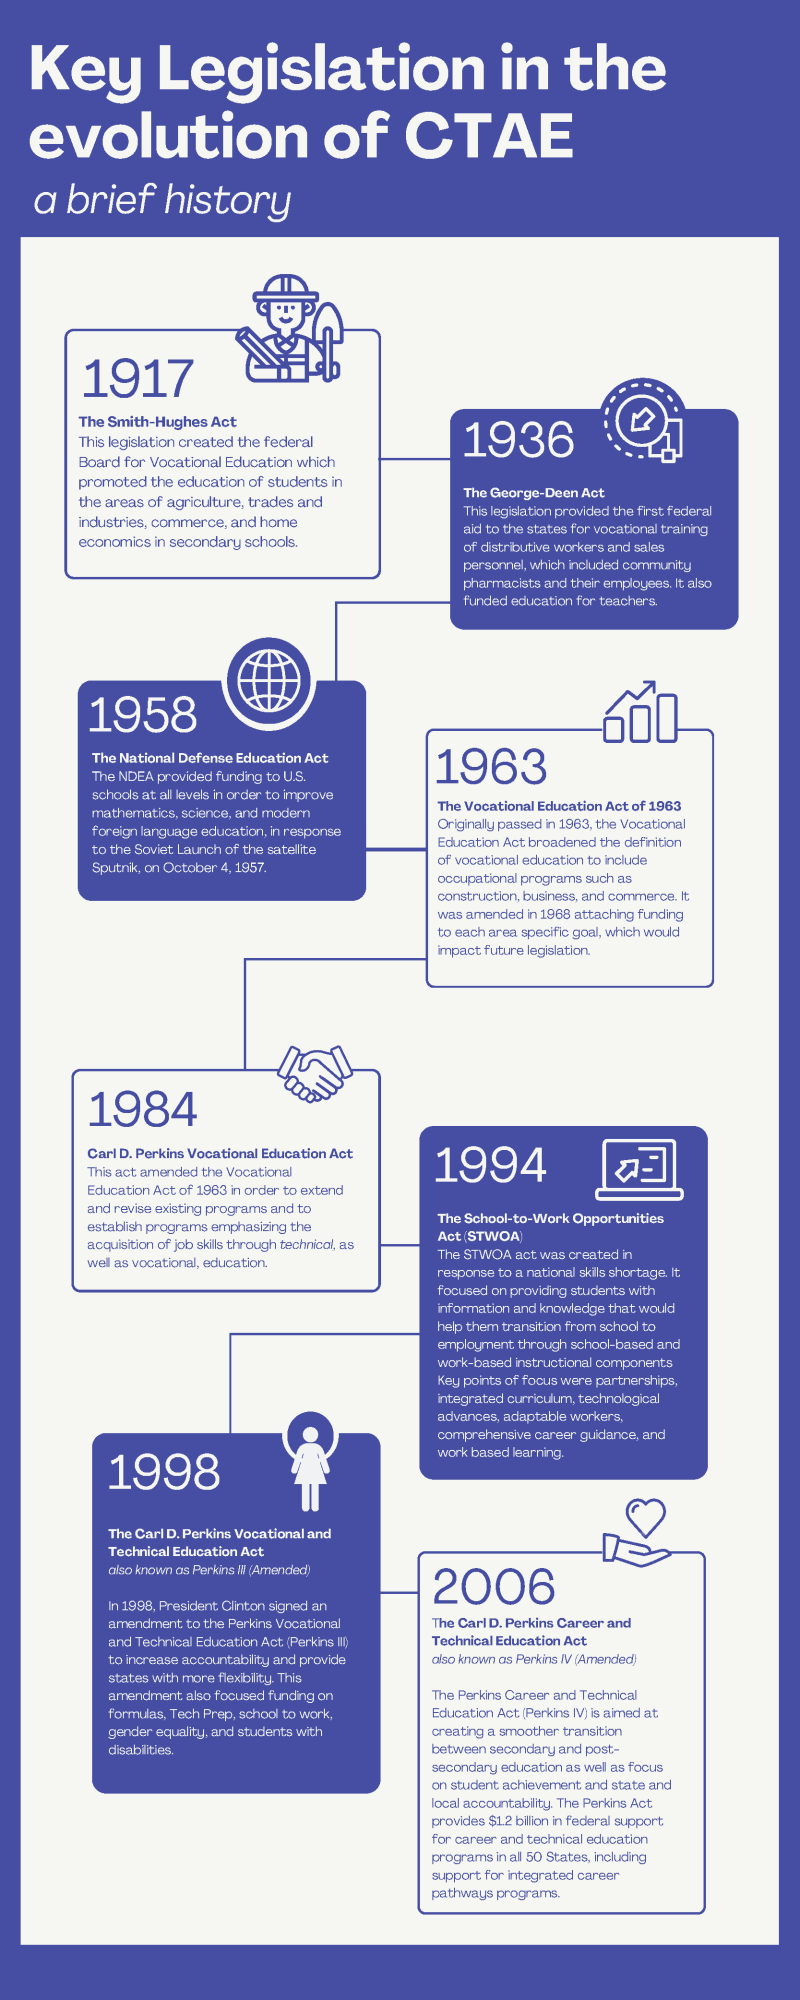 A Brief history of legisaltion impacting career and technical education.